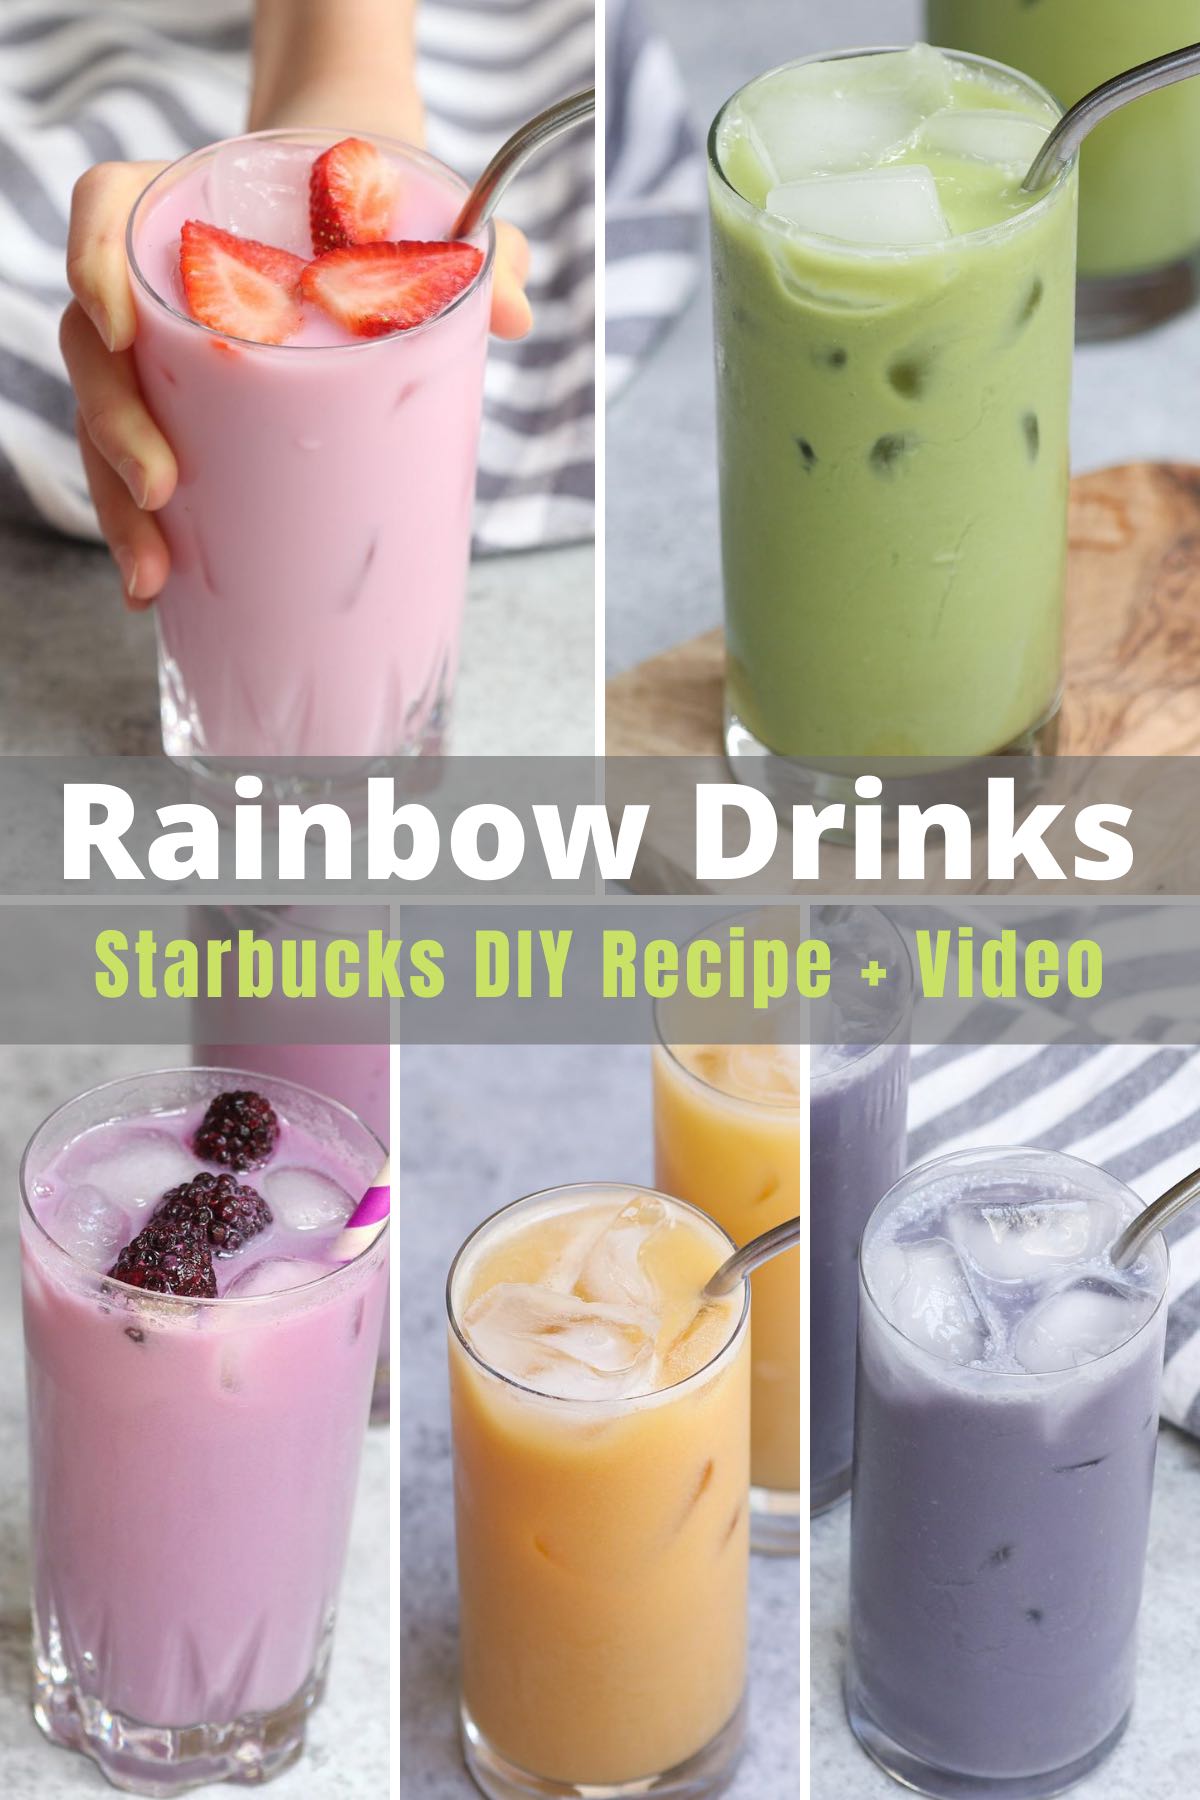 The internet has been obsessed with Starbucks’ Rainbow Drinks. The colorful rainbow-themed drinks have become must-have beverages in the summer. You’ll learn everything about these rainbow drinks, how to order them from the secret menu, and how to make copycat recipes at home! #StarbucksRainbowDrink